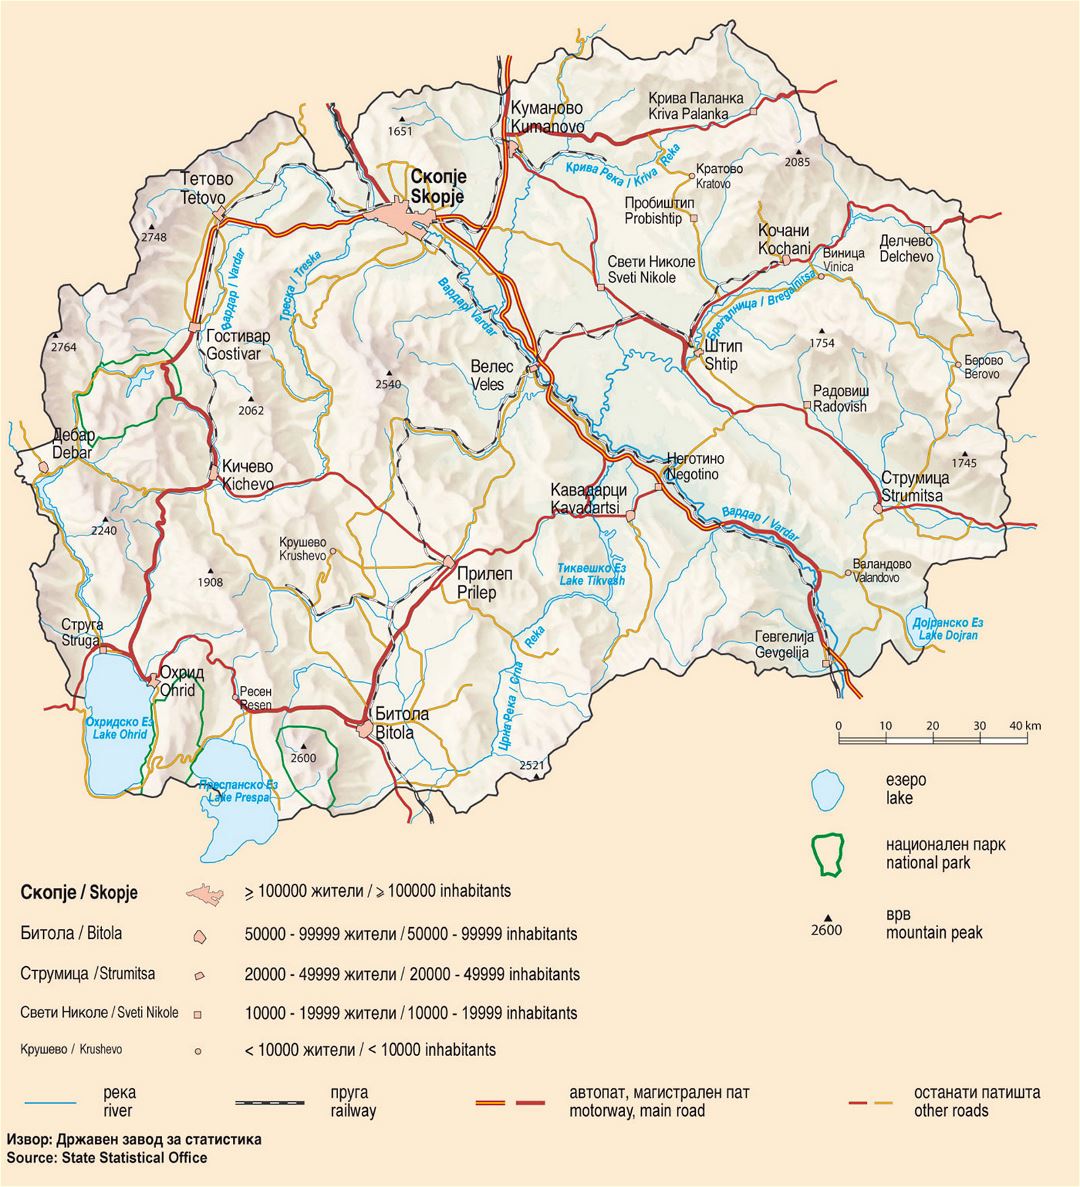 Large map of Macedonia with relief, roads and cities